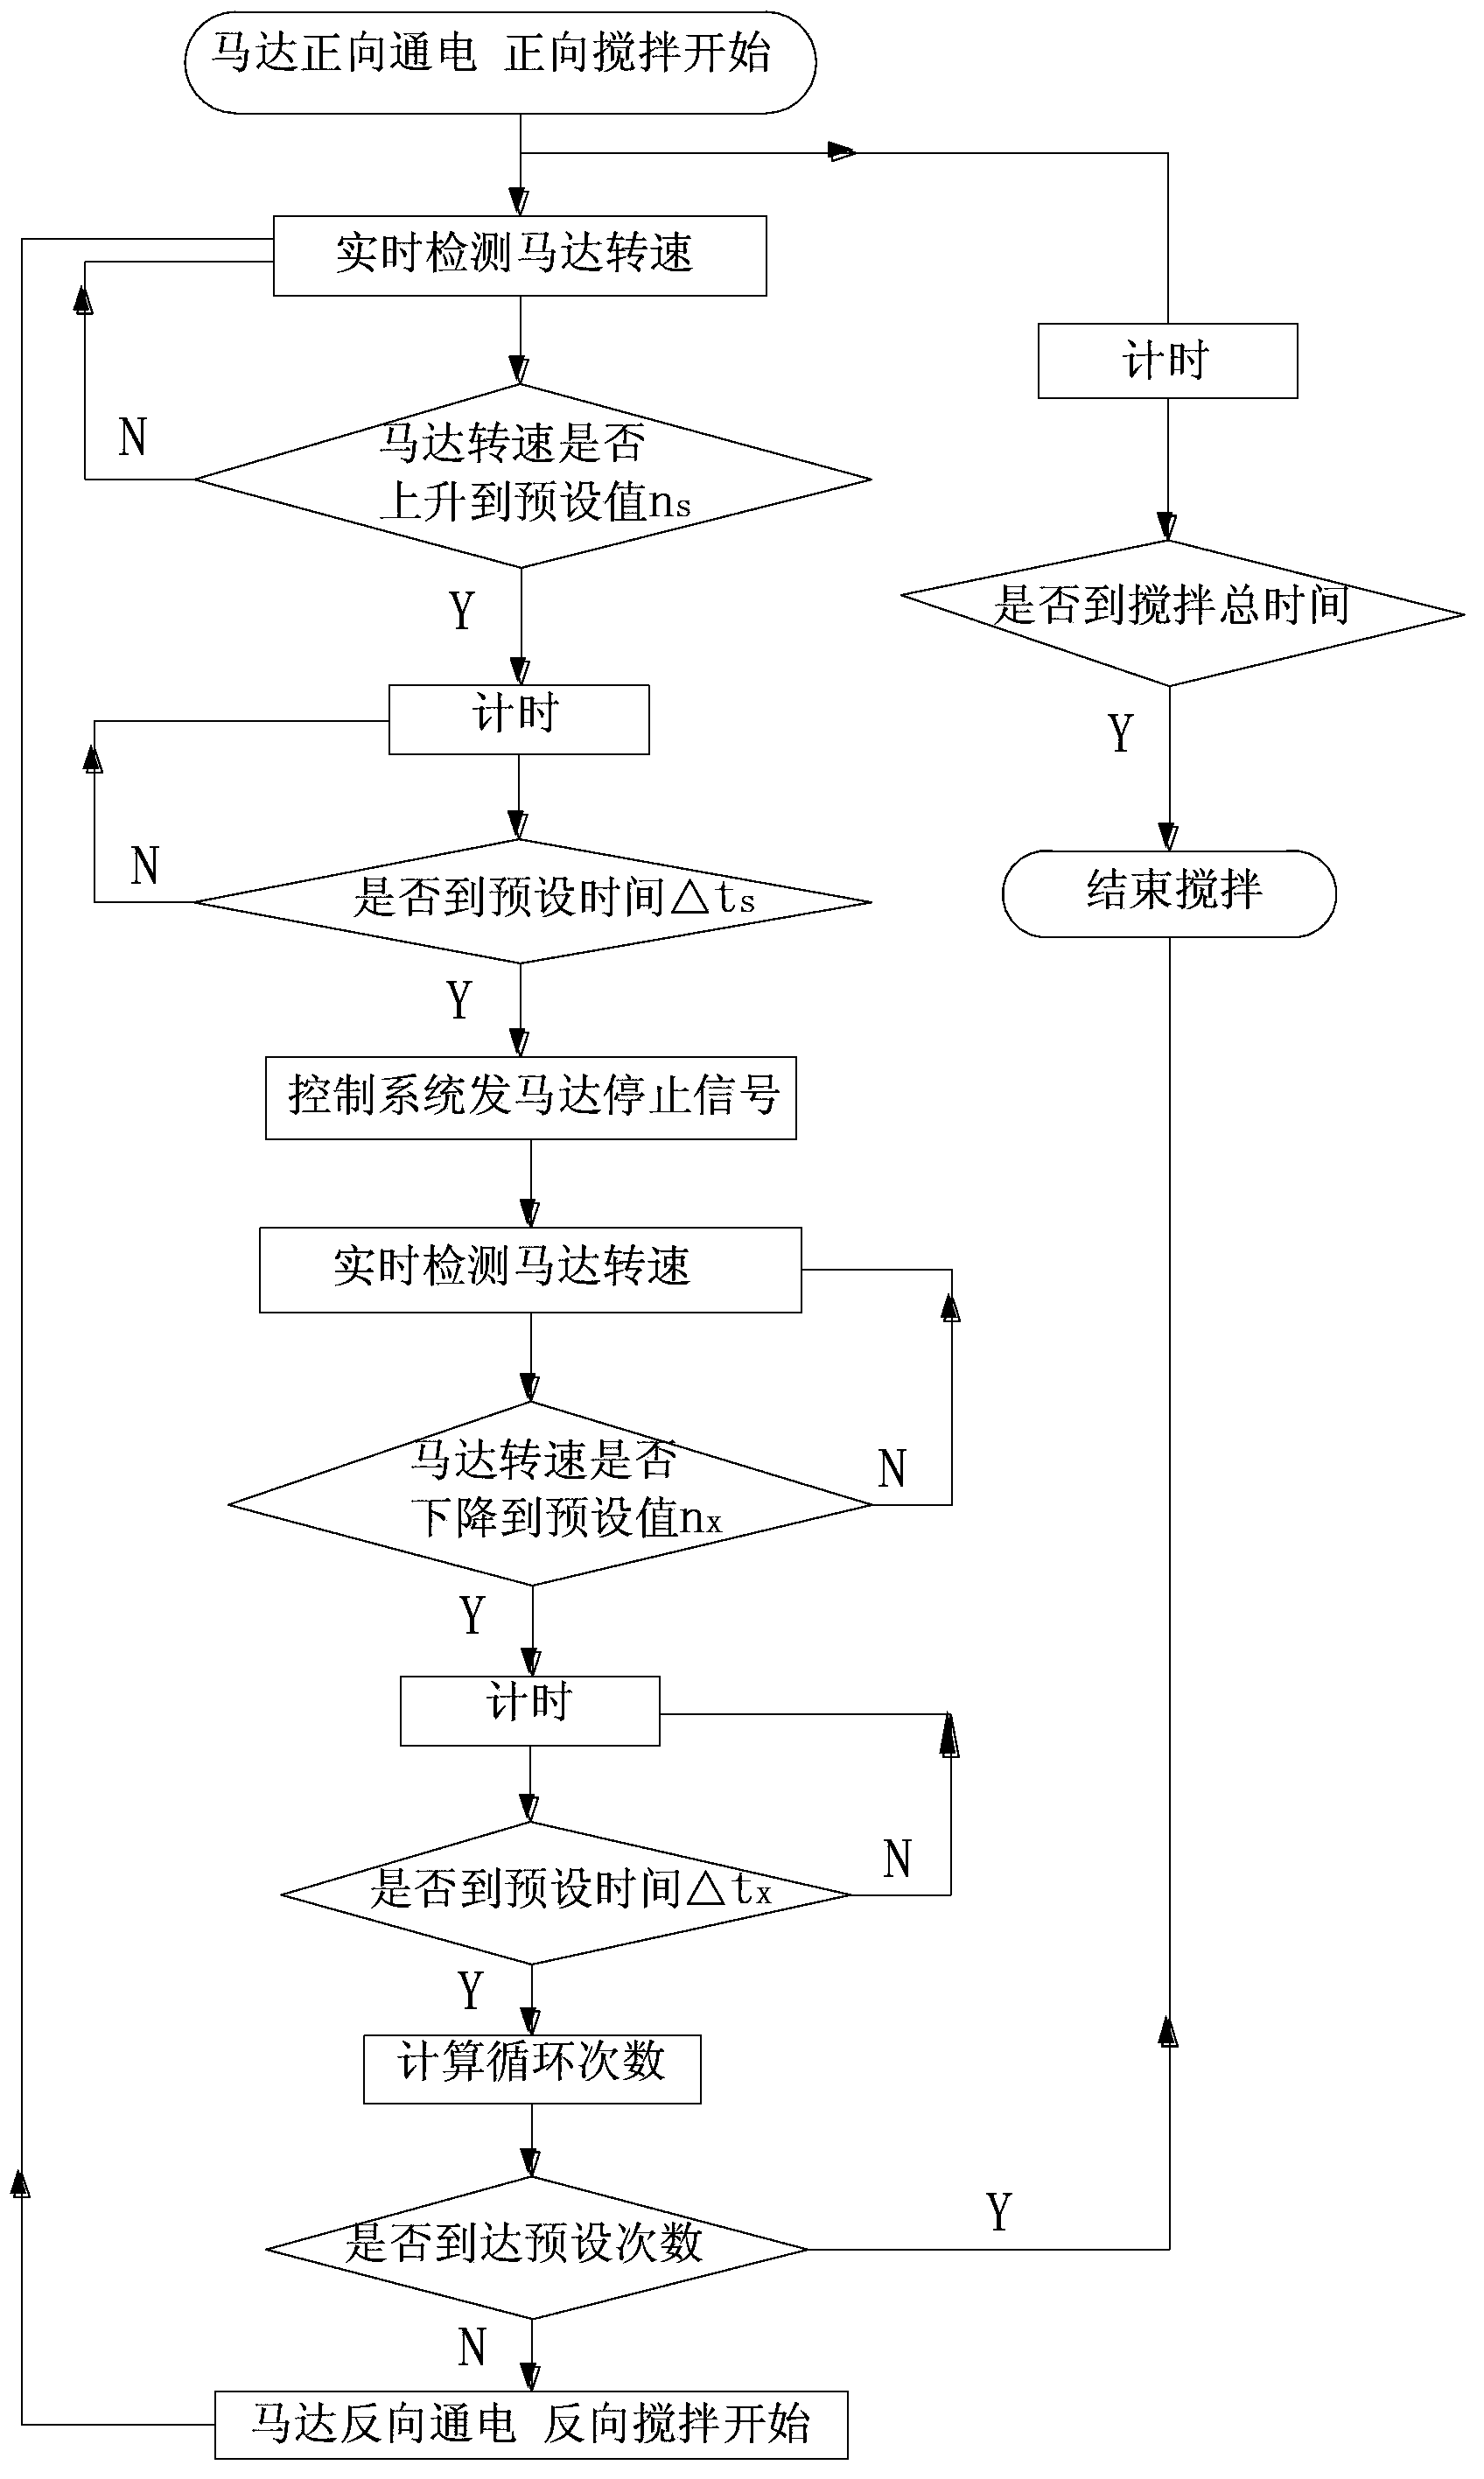 Method for controlling clothes stirring of washing machine